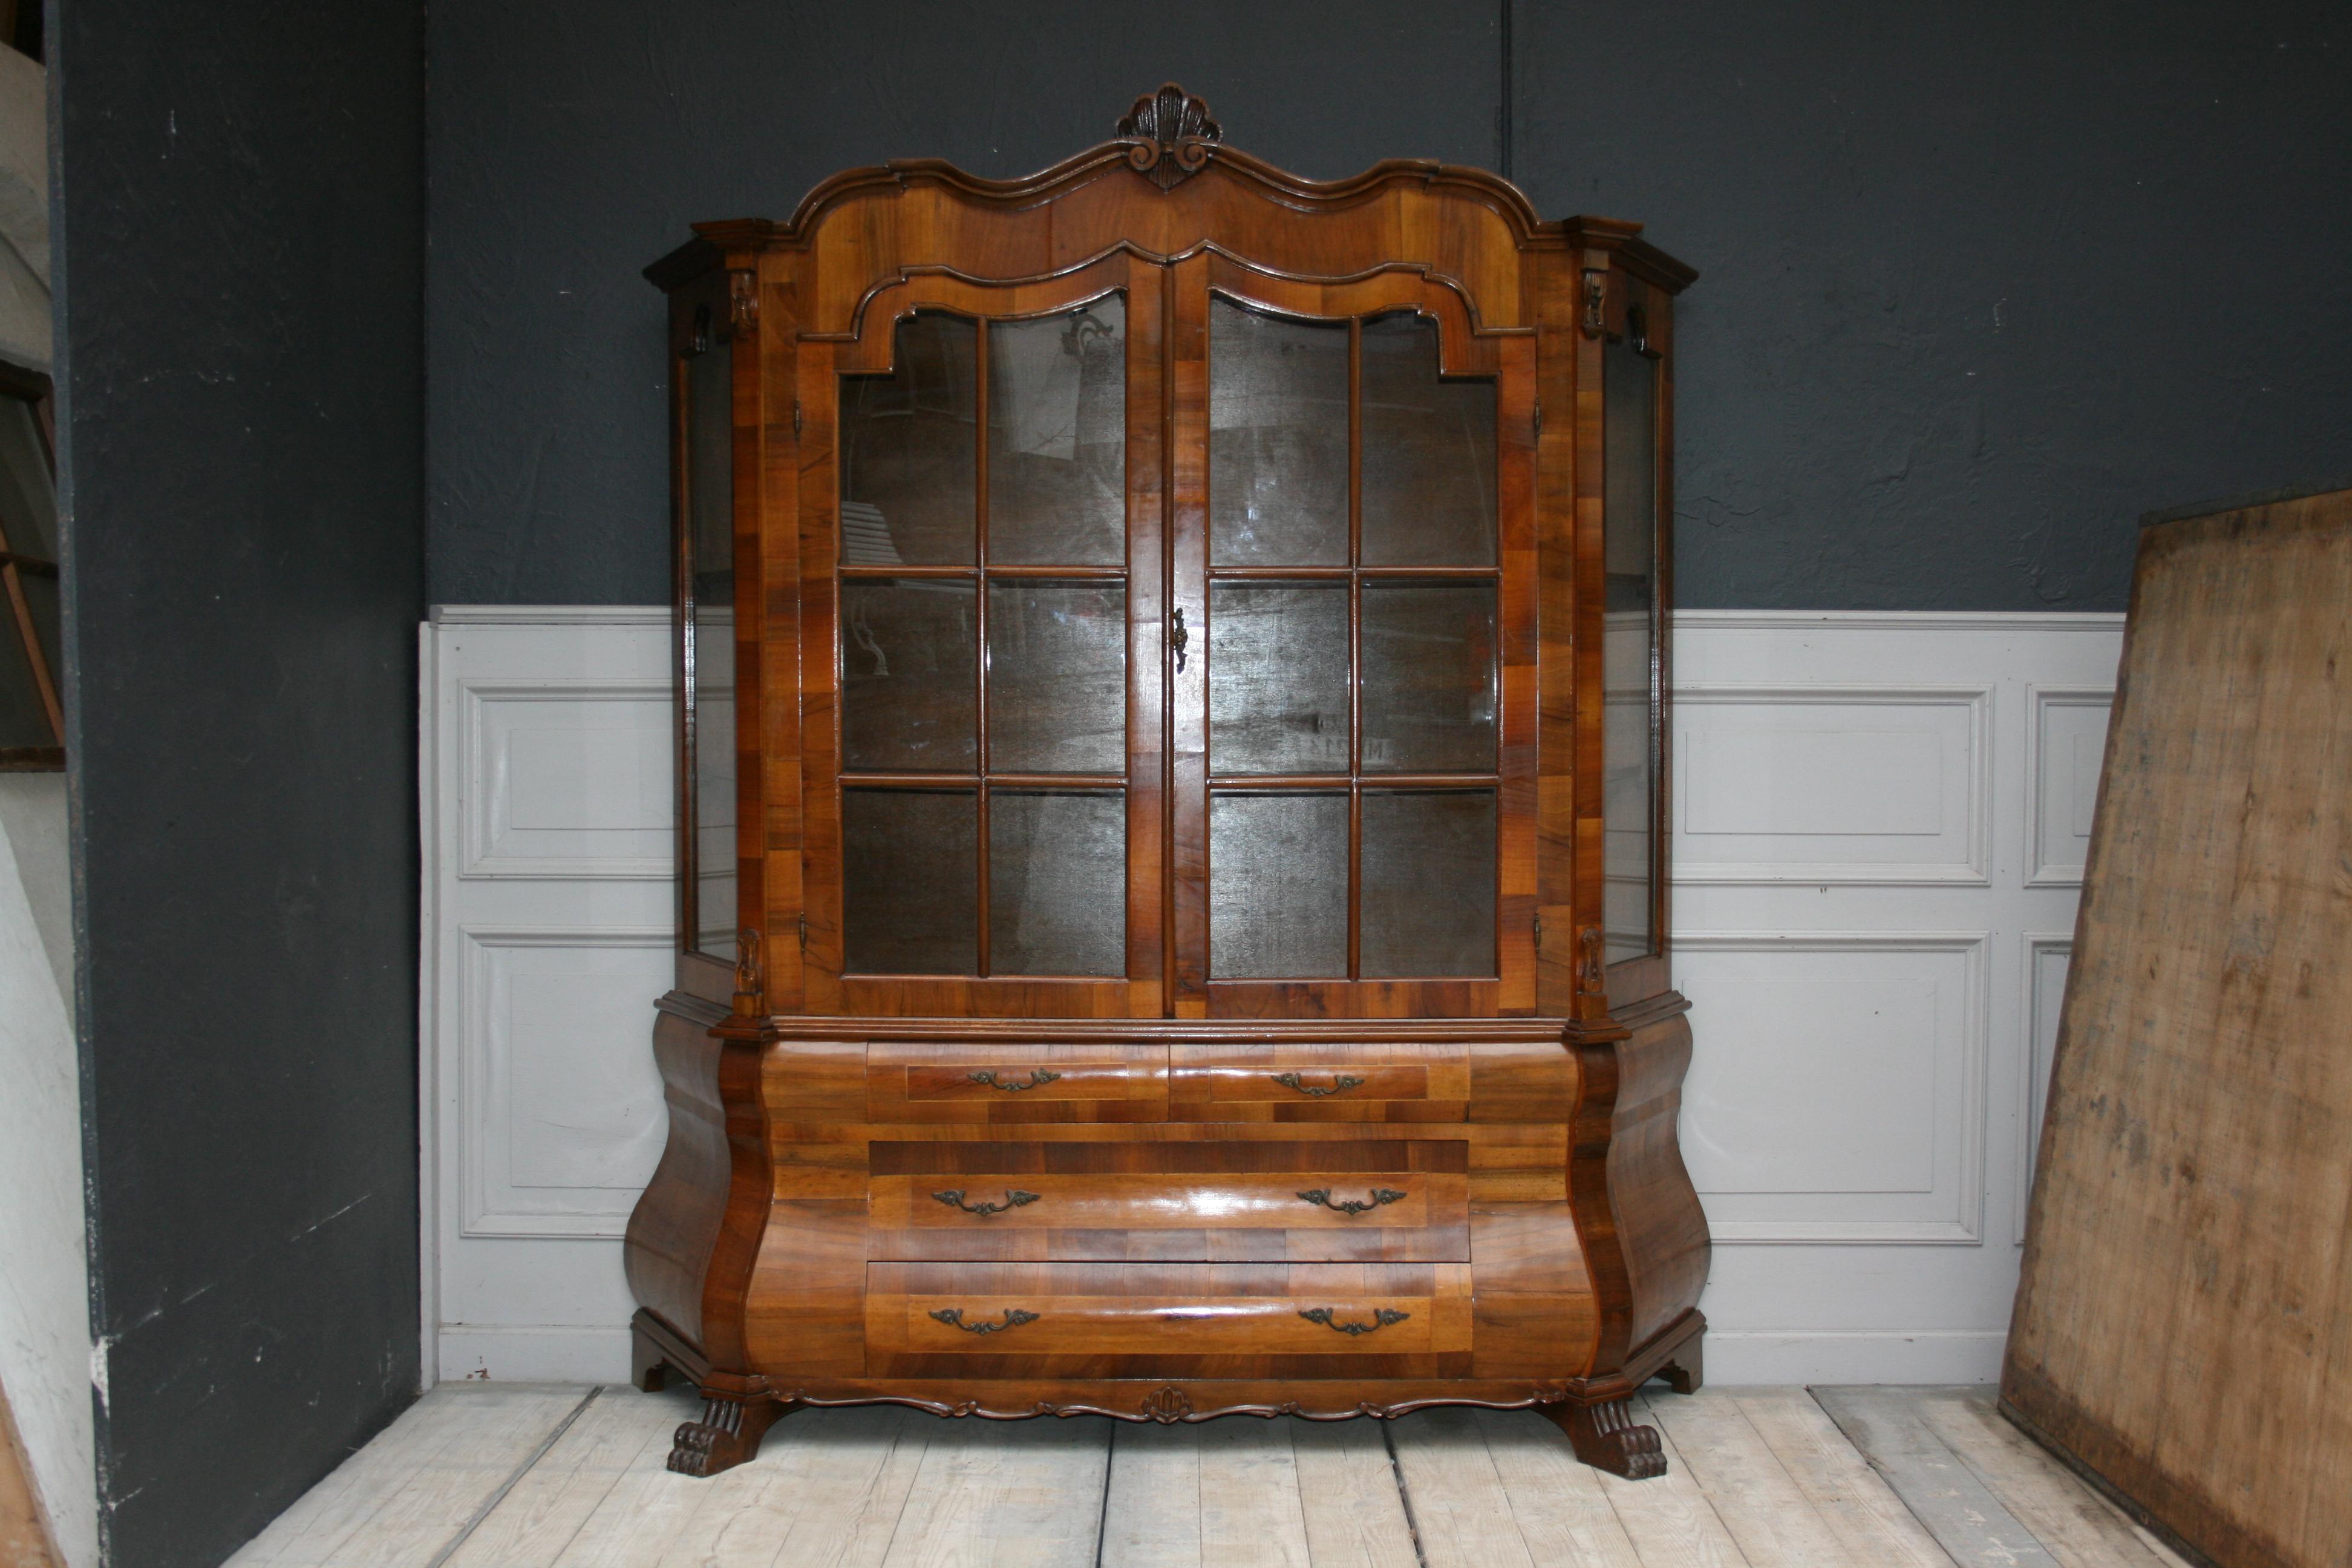 Large 20th century display cabinet in Dutch Baroque style with walnut veneer on a strongly bowed frame. Probably made in Italy. The display cabinet consists of a bulging base (Pedestal on claw-feet) with 2 large drawers and 2 small drawers, and a